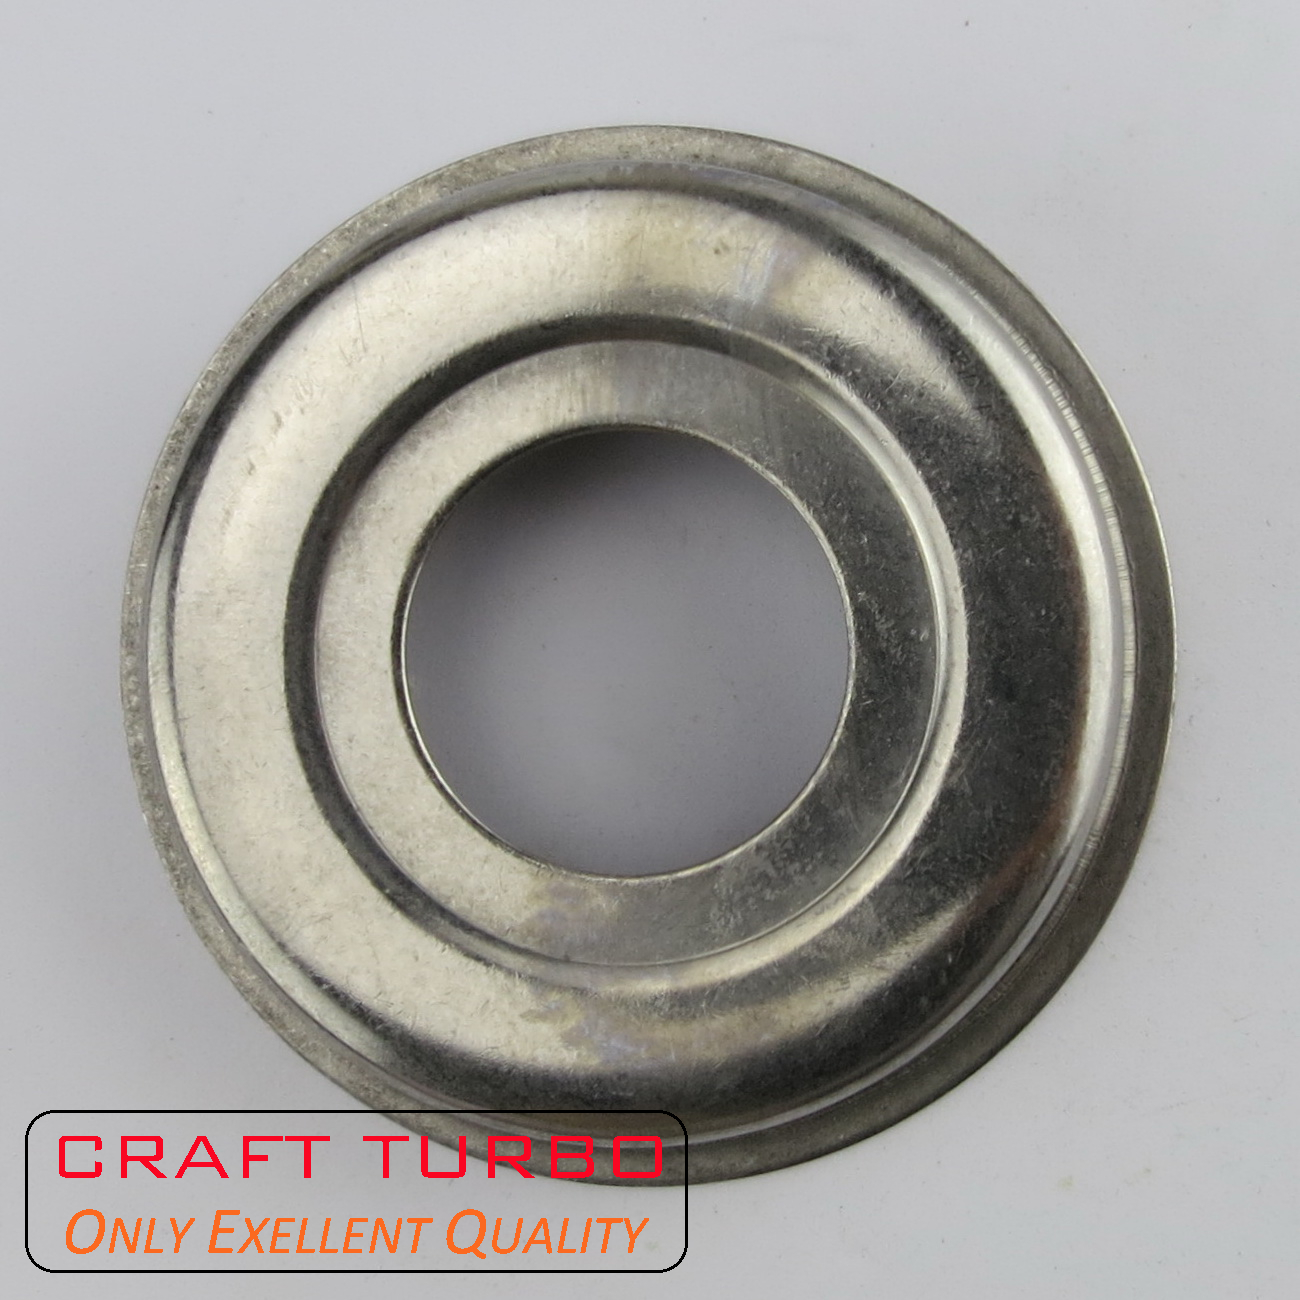 CT12 Heat Shield for Turbocharger 